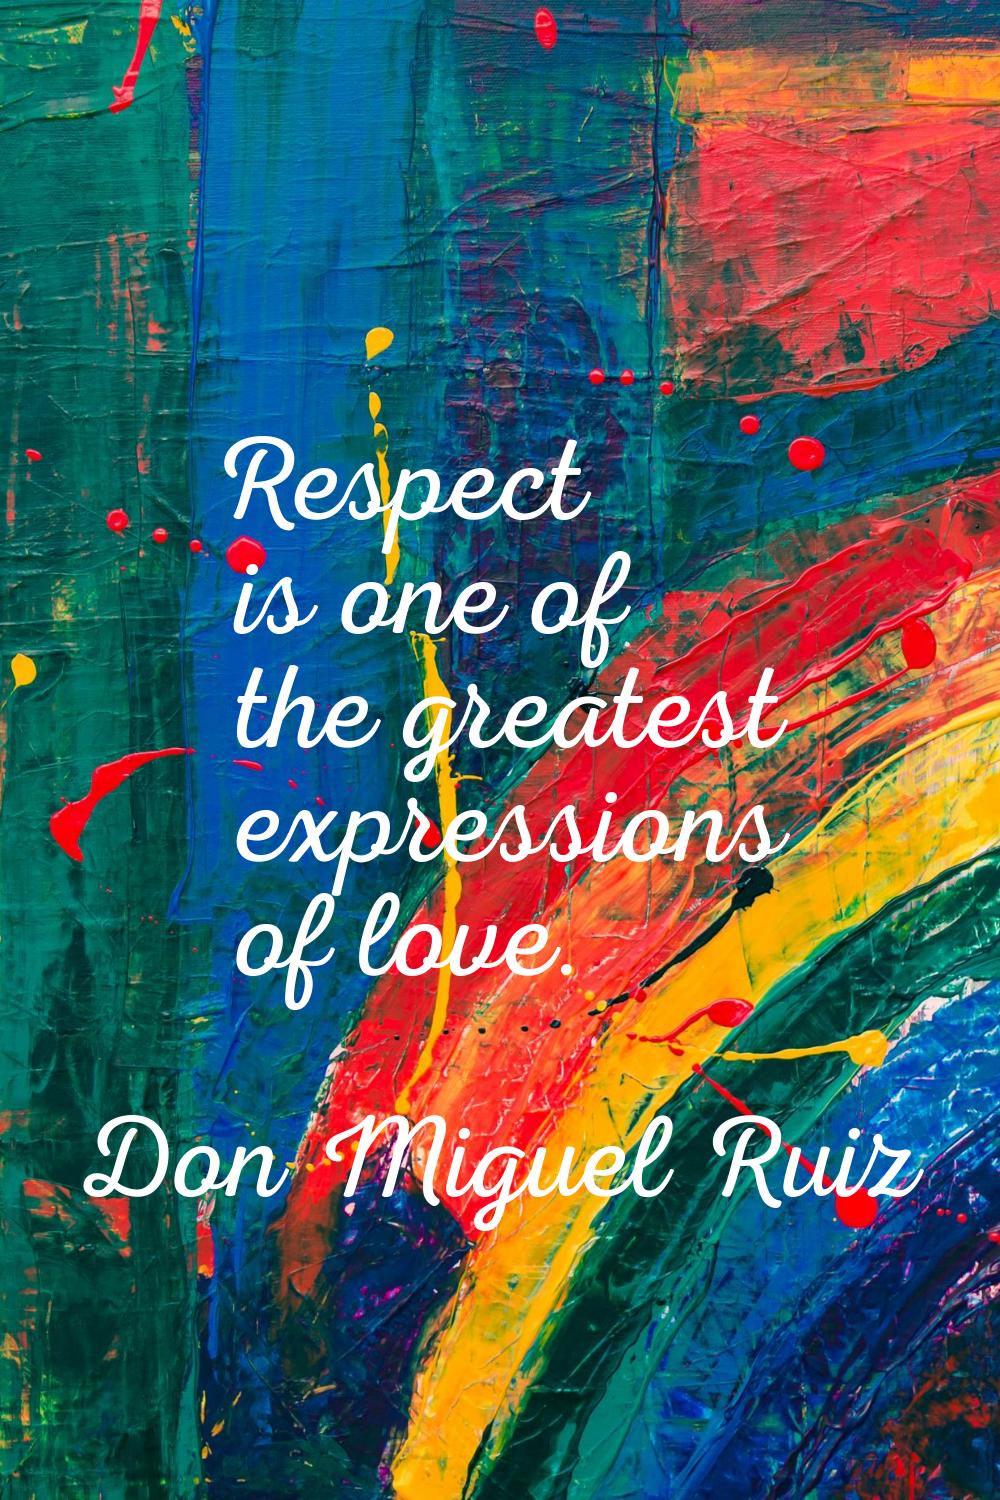 Respect is one of the greatest expressions of love.